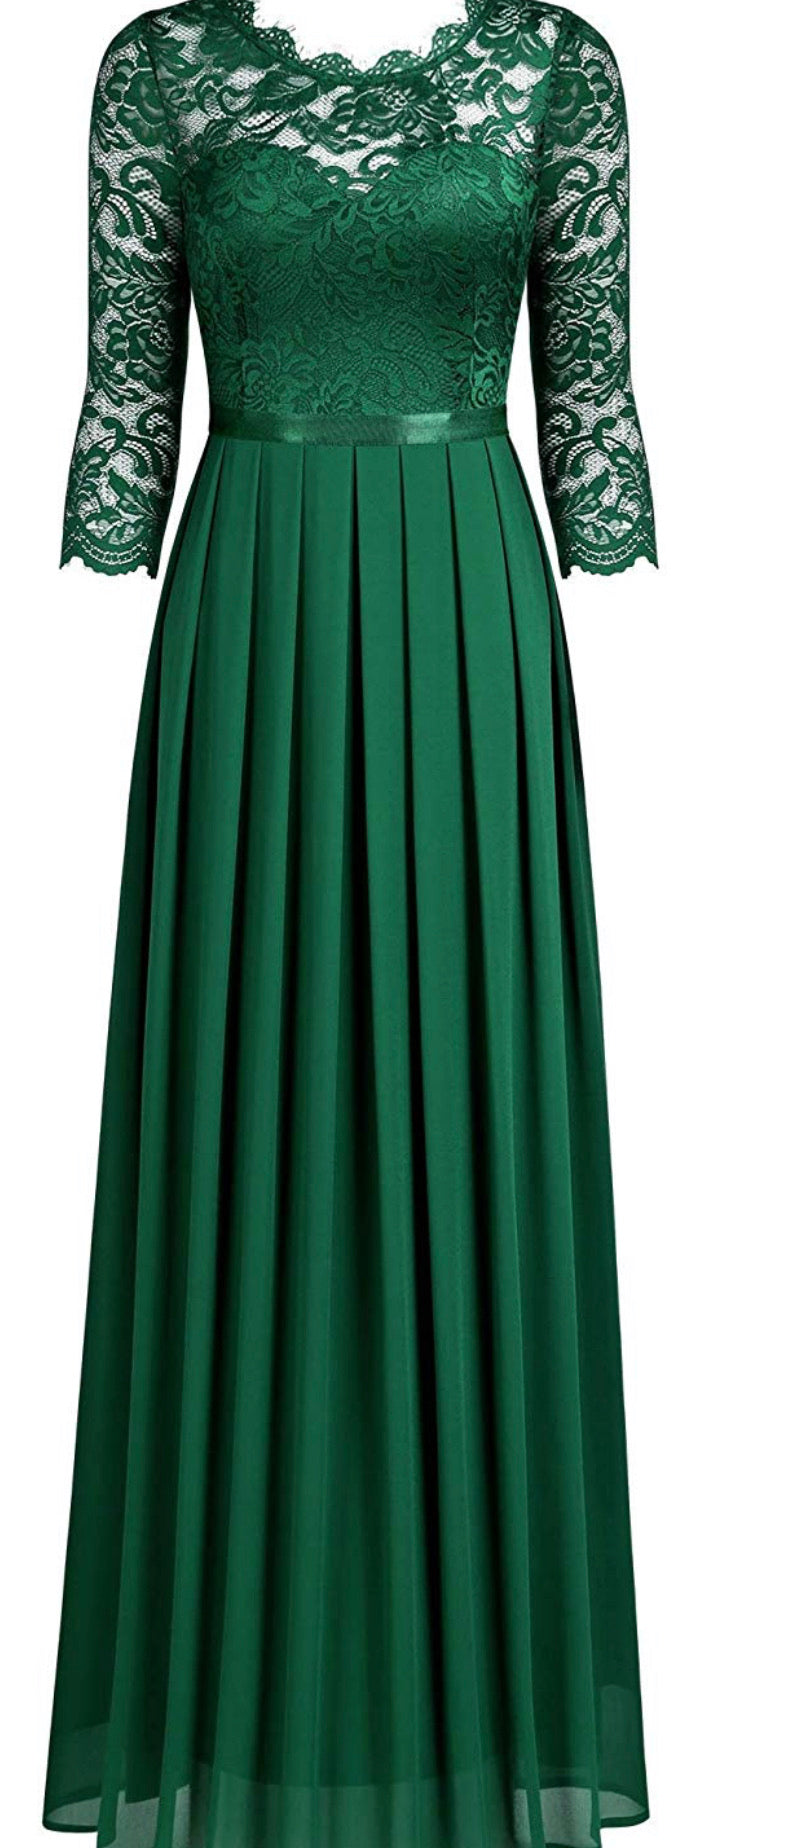 Long Green Lace Patterned Dress, Sizes Small - 2XLarge (US Sizes 4 - 18)